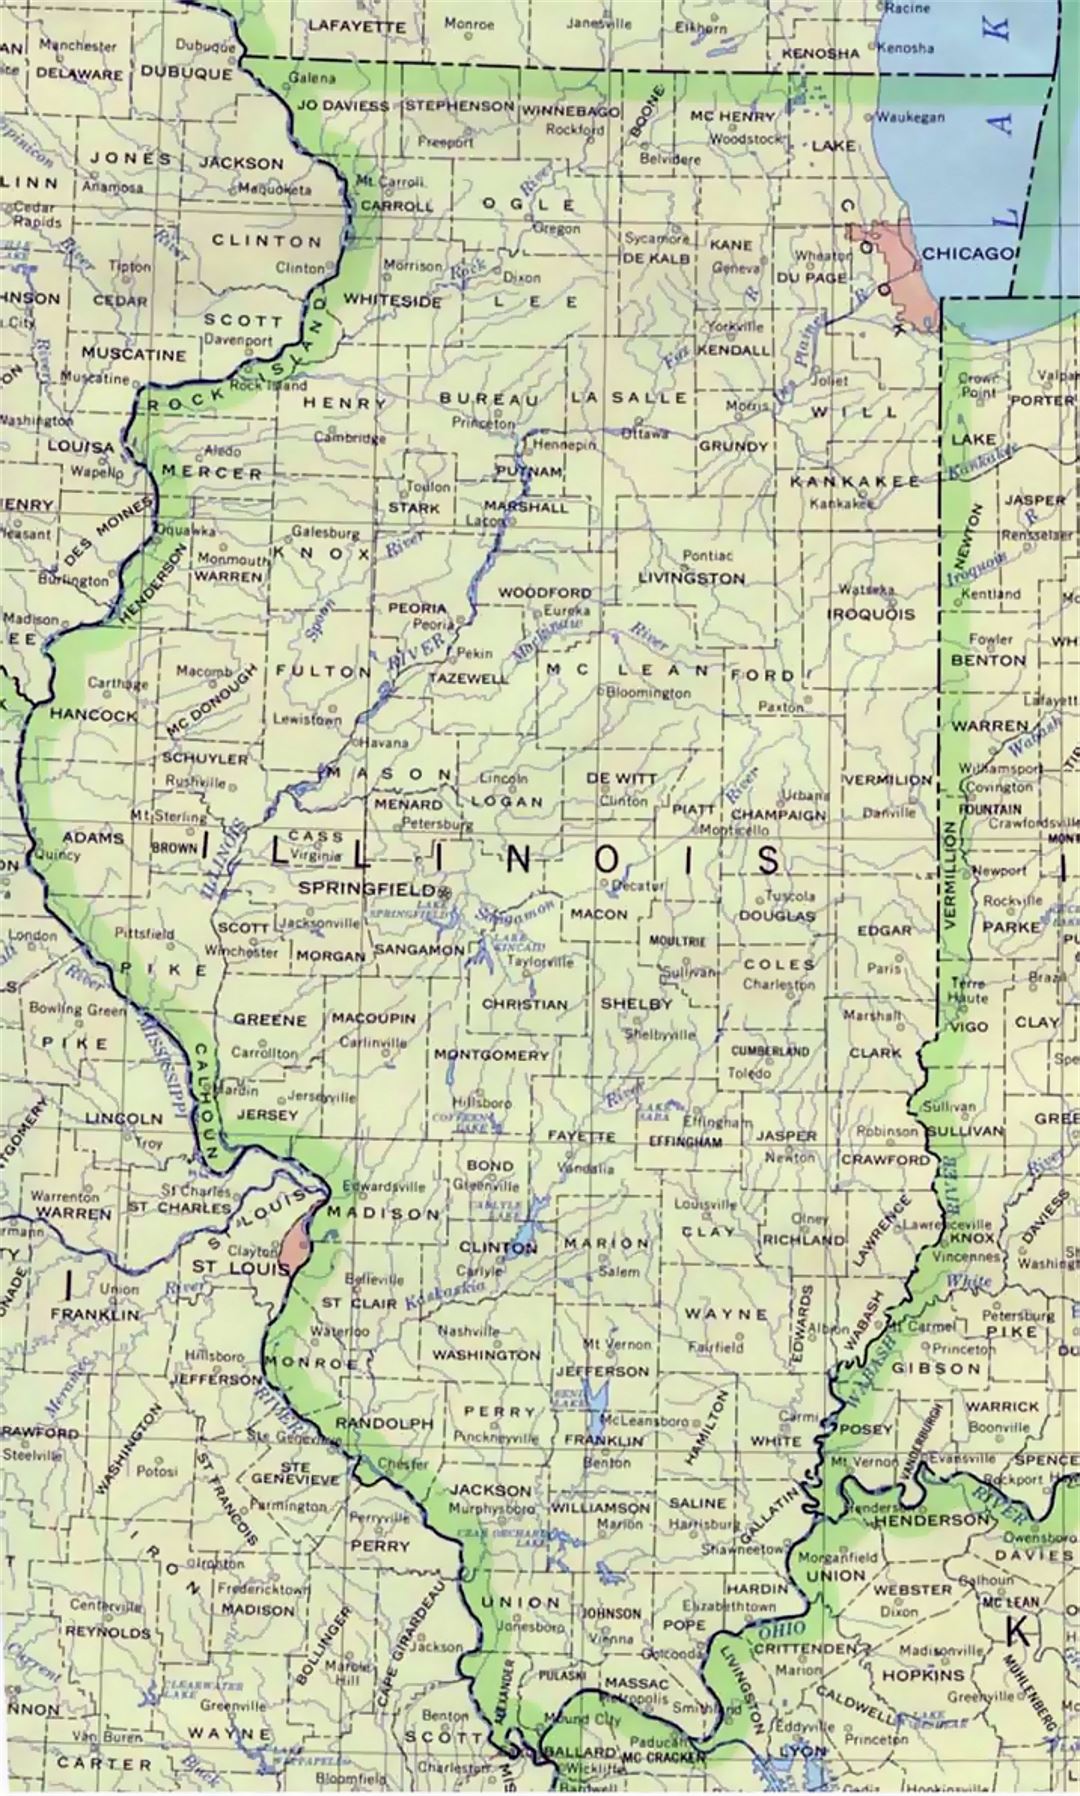 Administrative map of Illinois state